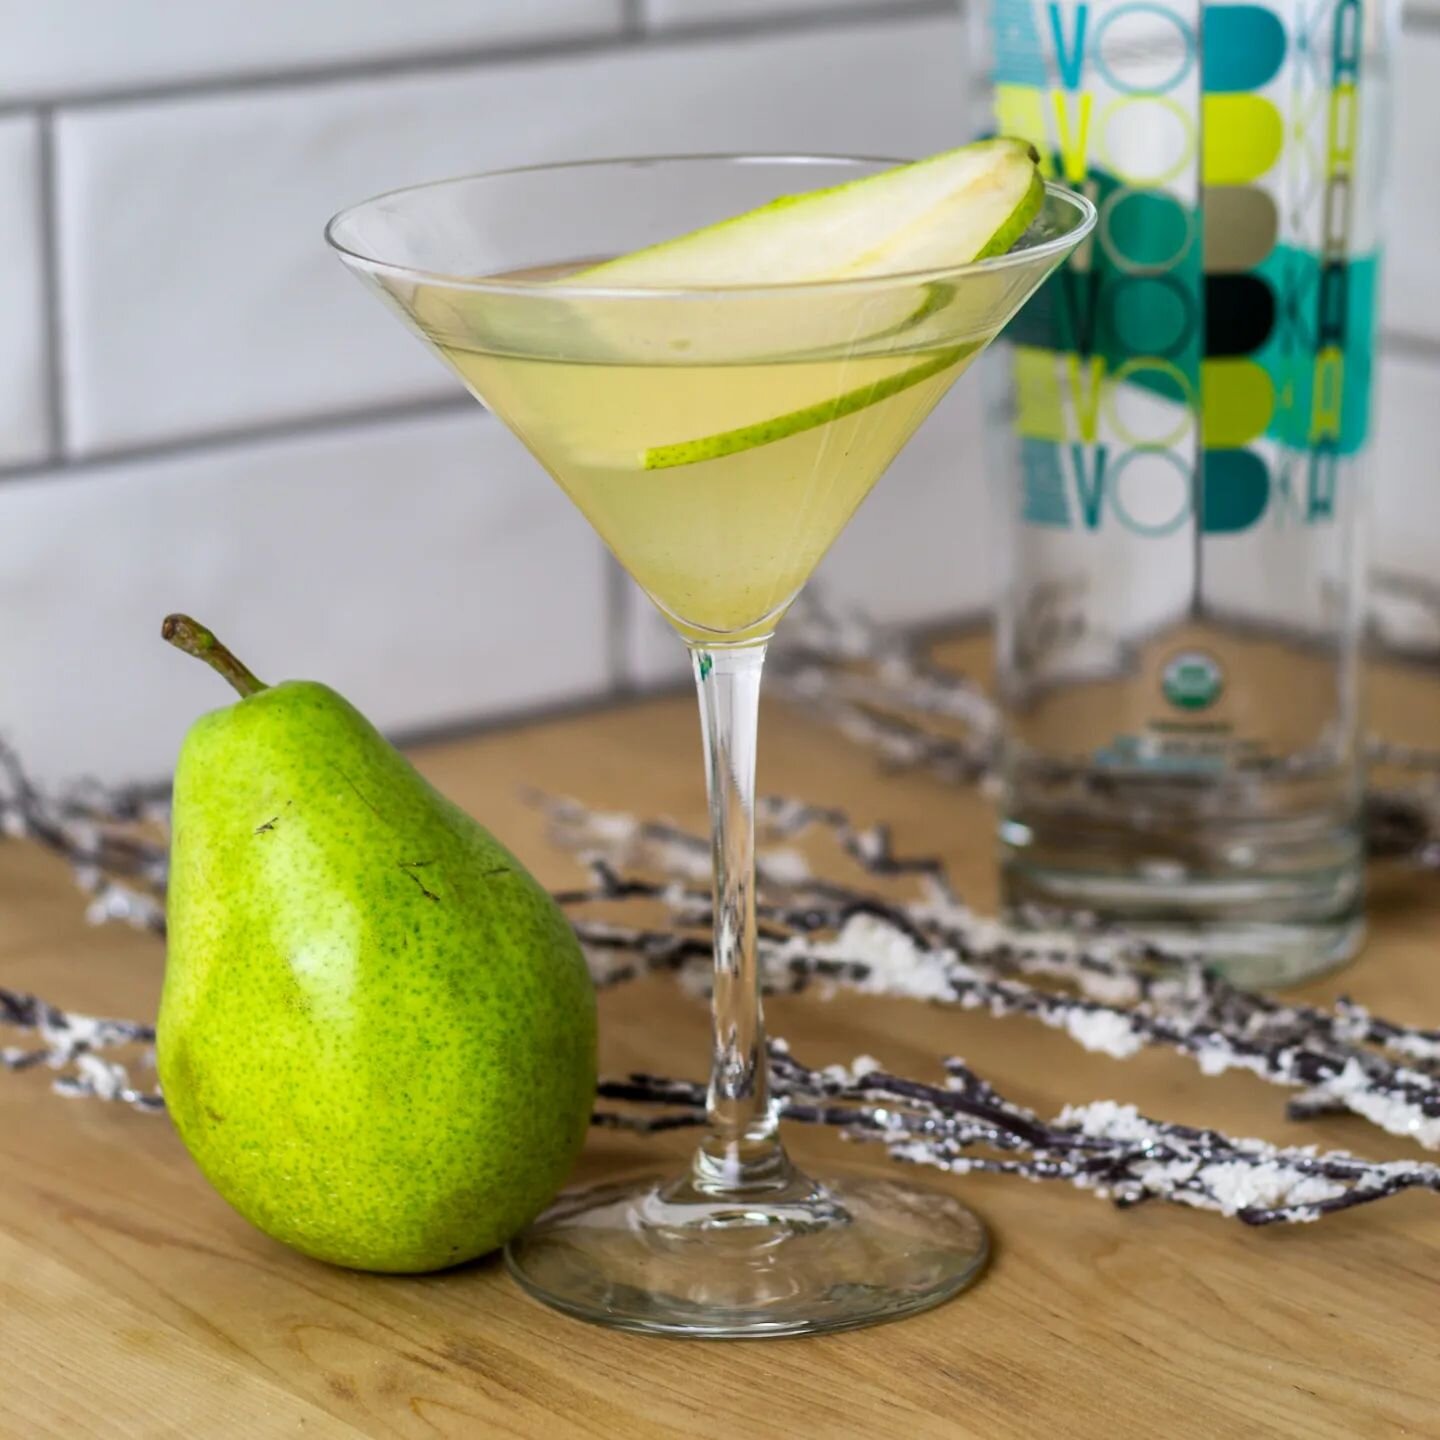 Shake things up with this easy-to-make Pear Martini recipe! 

Hotcha Pear Martini

1 Organic Pear
2 1/2 oz Hotcha Vodka
1/2 oz Simple Syrup

Roughly chop 1/4 to 1/2 an organic pear (less for a subtle pear flavor, more for a stronger pear flavor). Mud